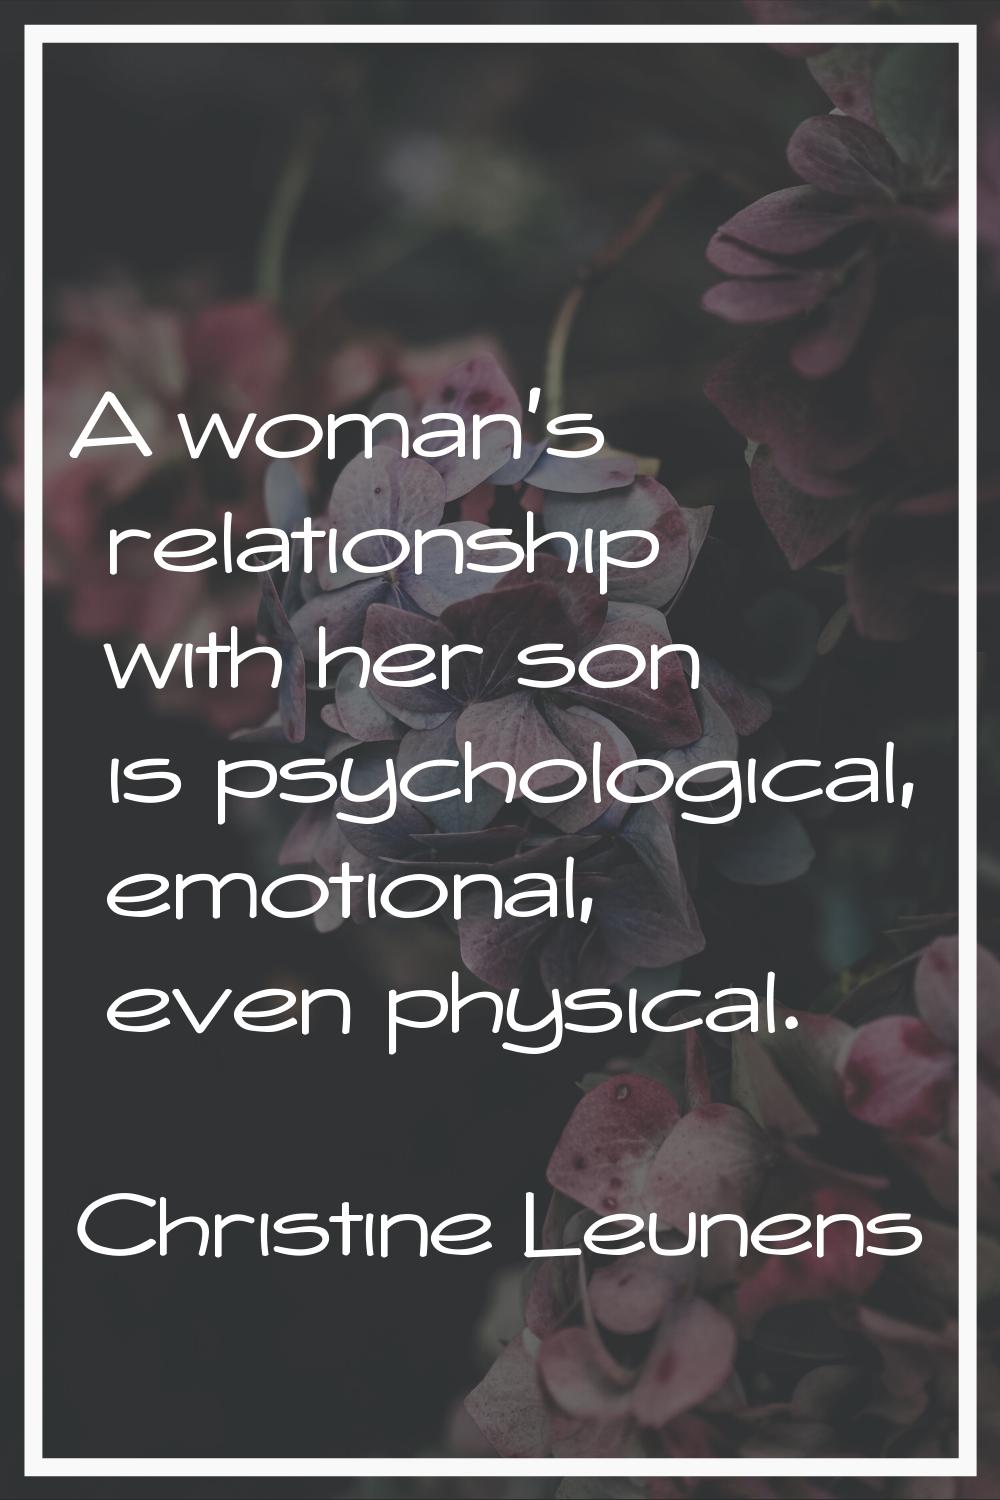 A woman's relationship with her son is psychological, emotional, even physical.